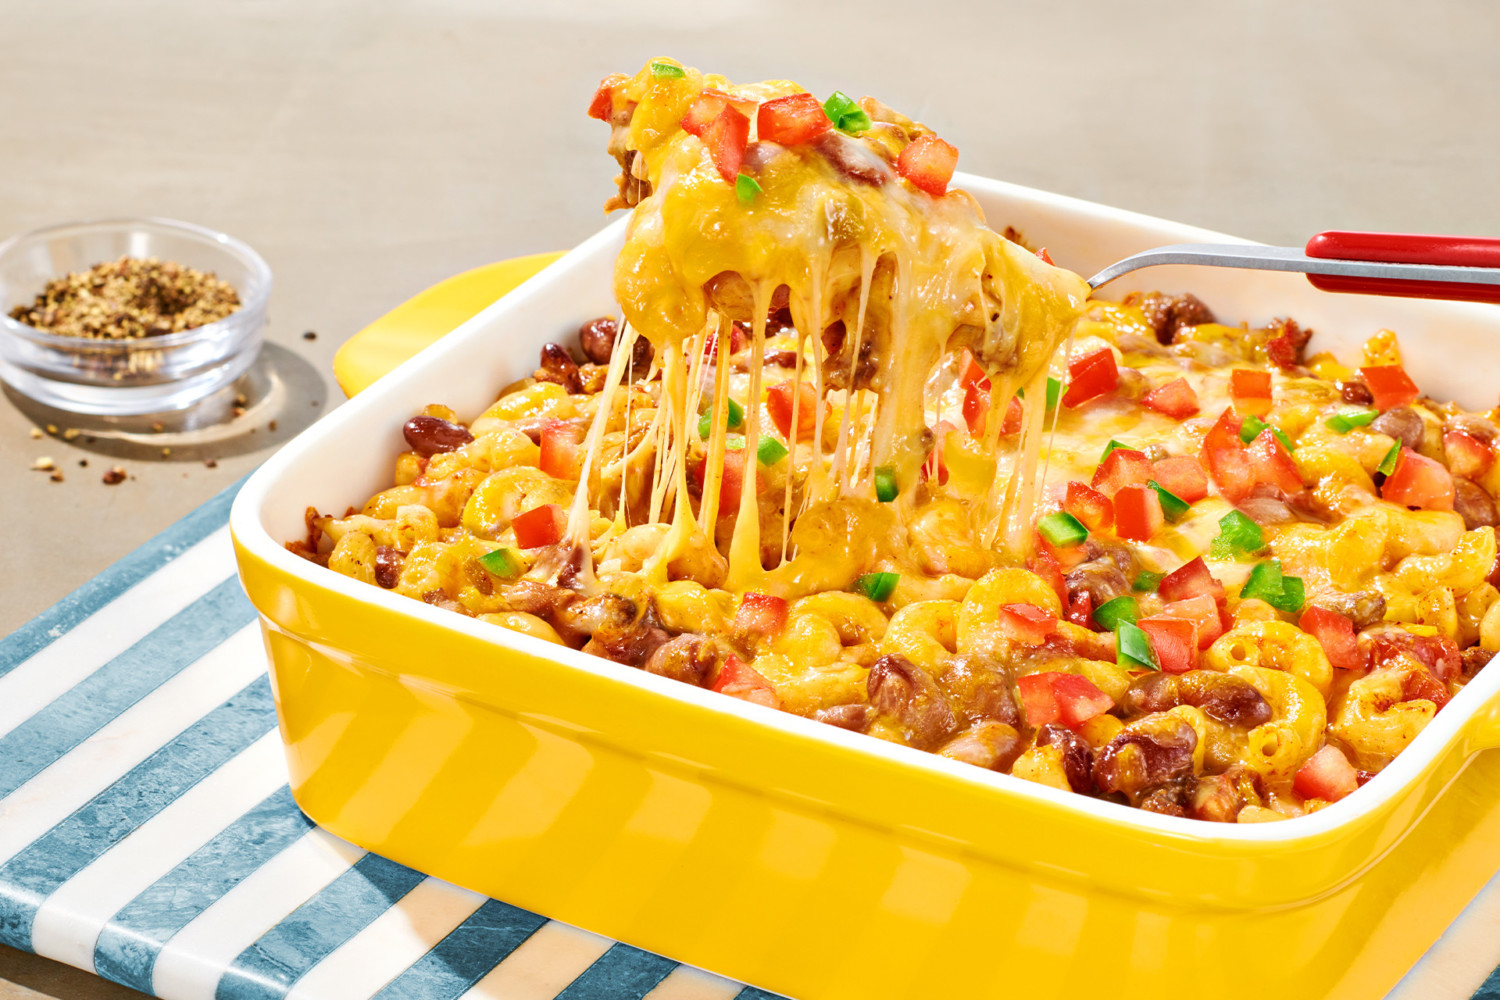 Baked Mexican Chili Pasta in yellow dish